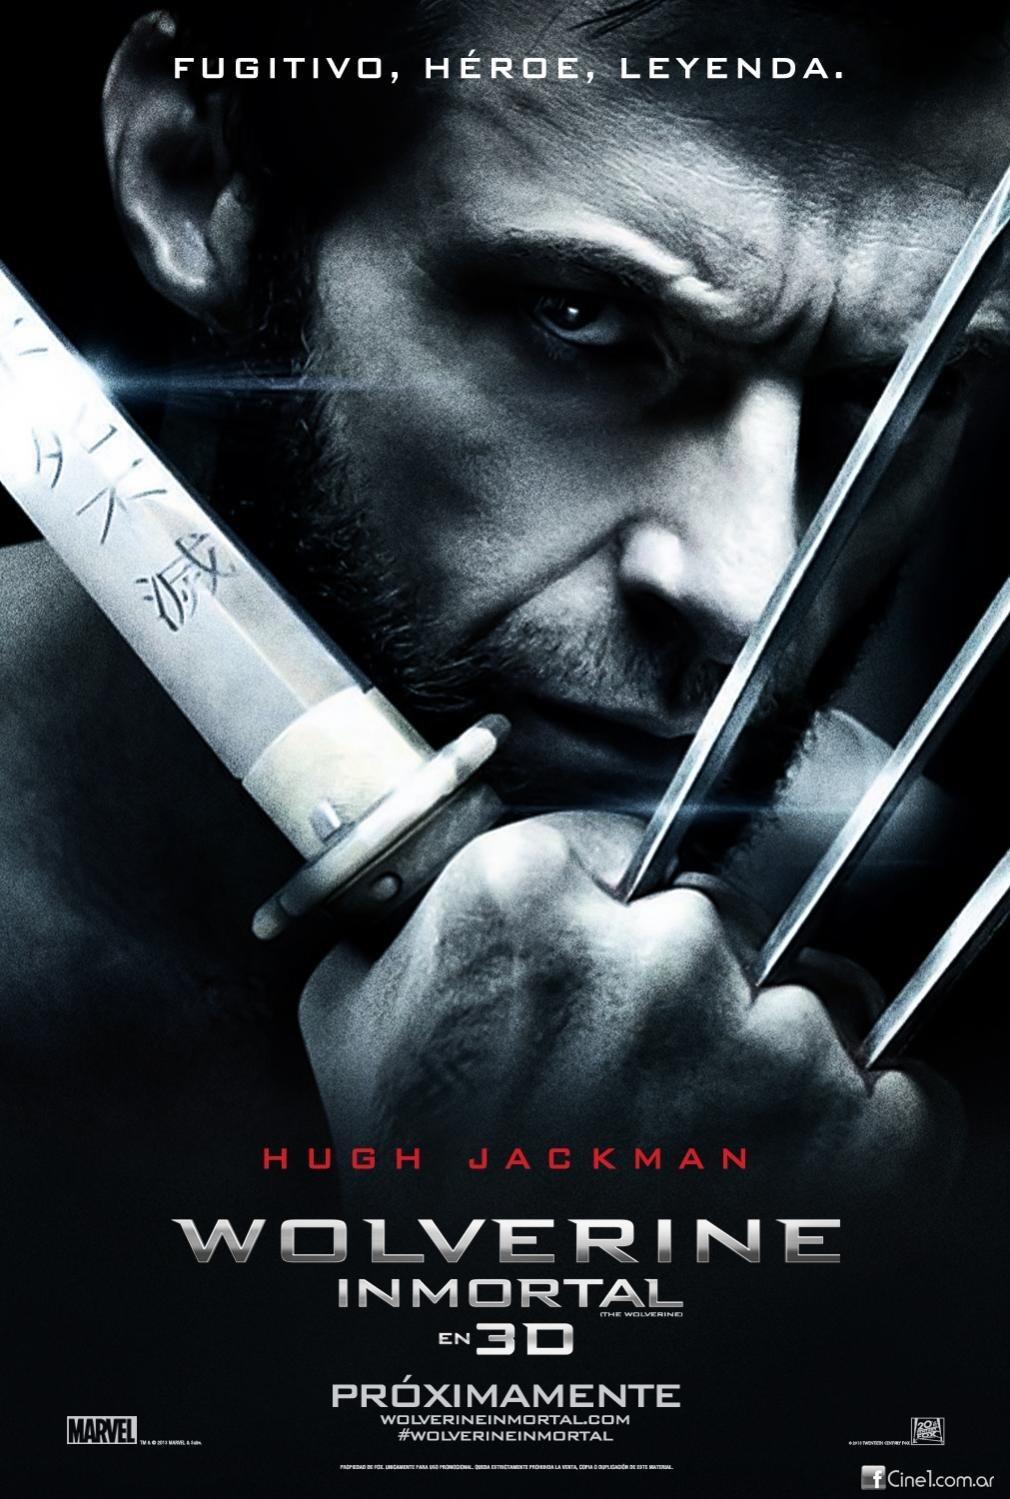 Let The Claws Do The Talking & Review "The Wolverine